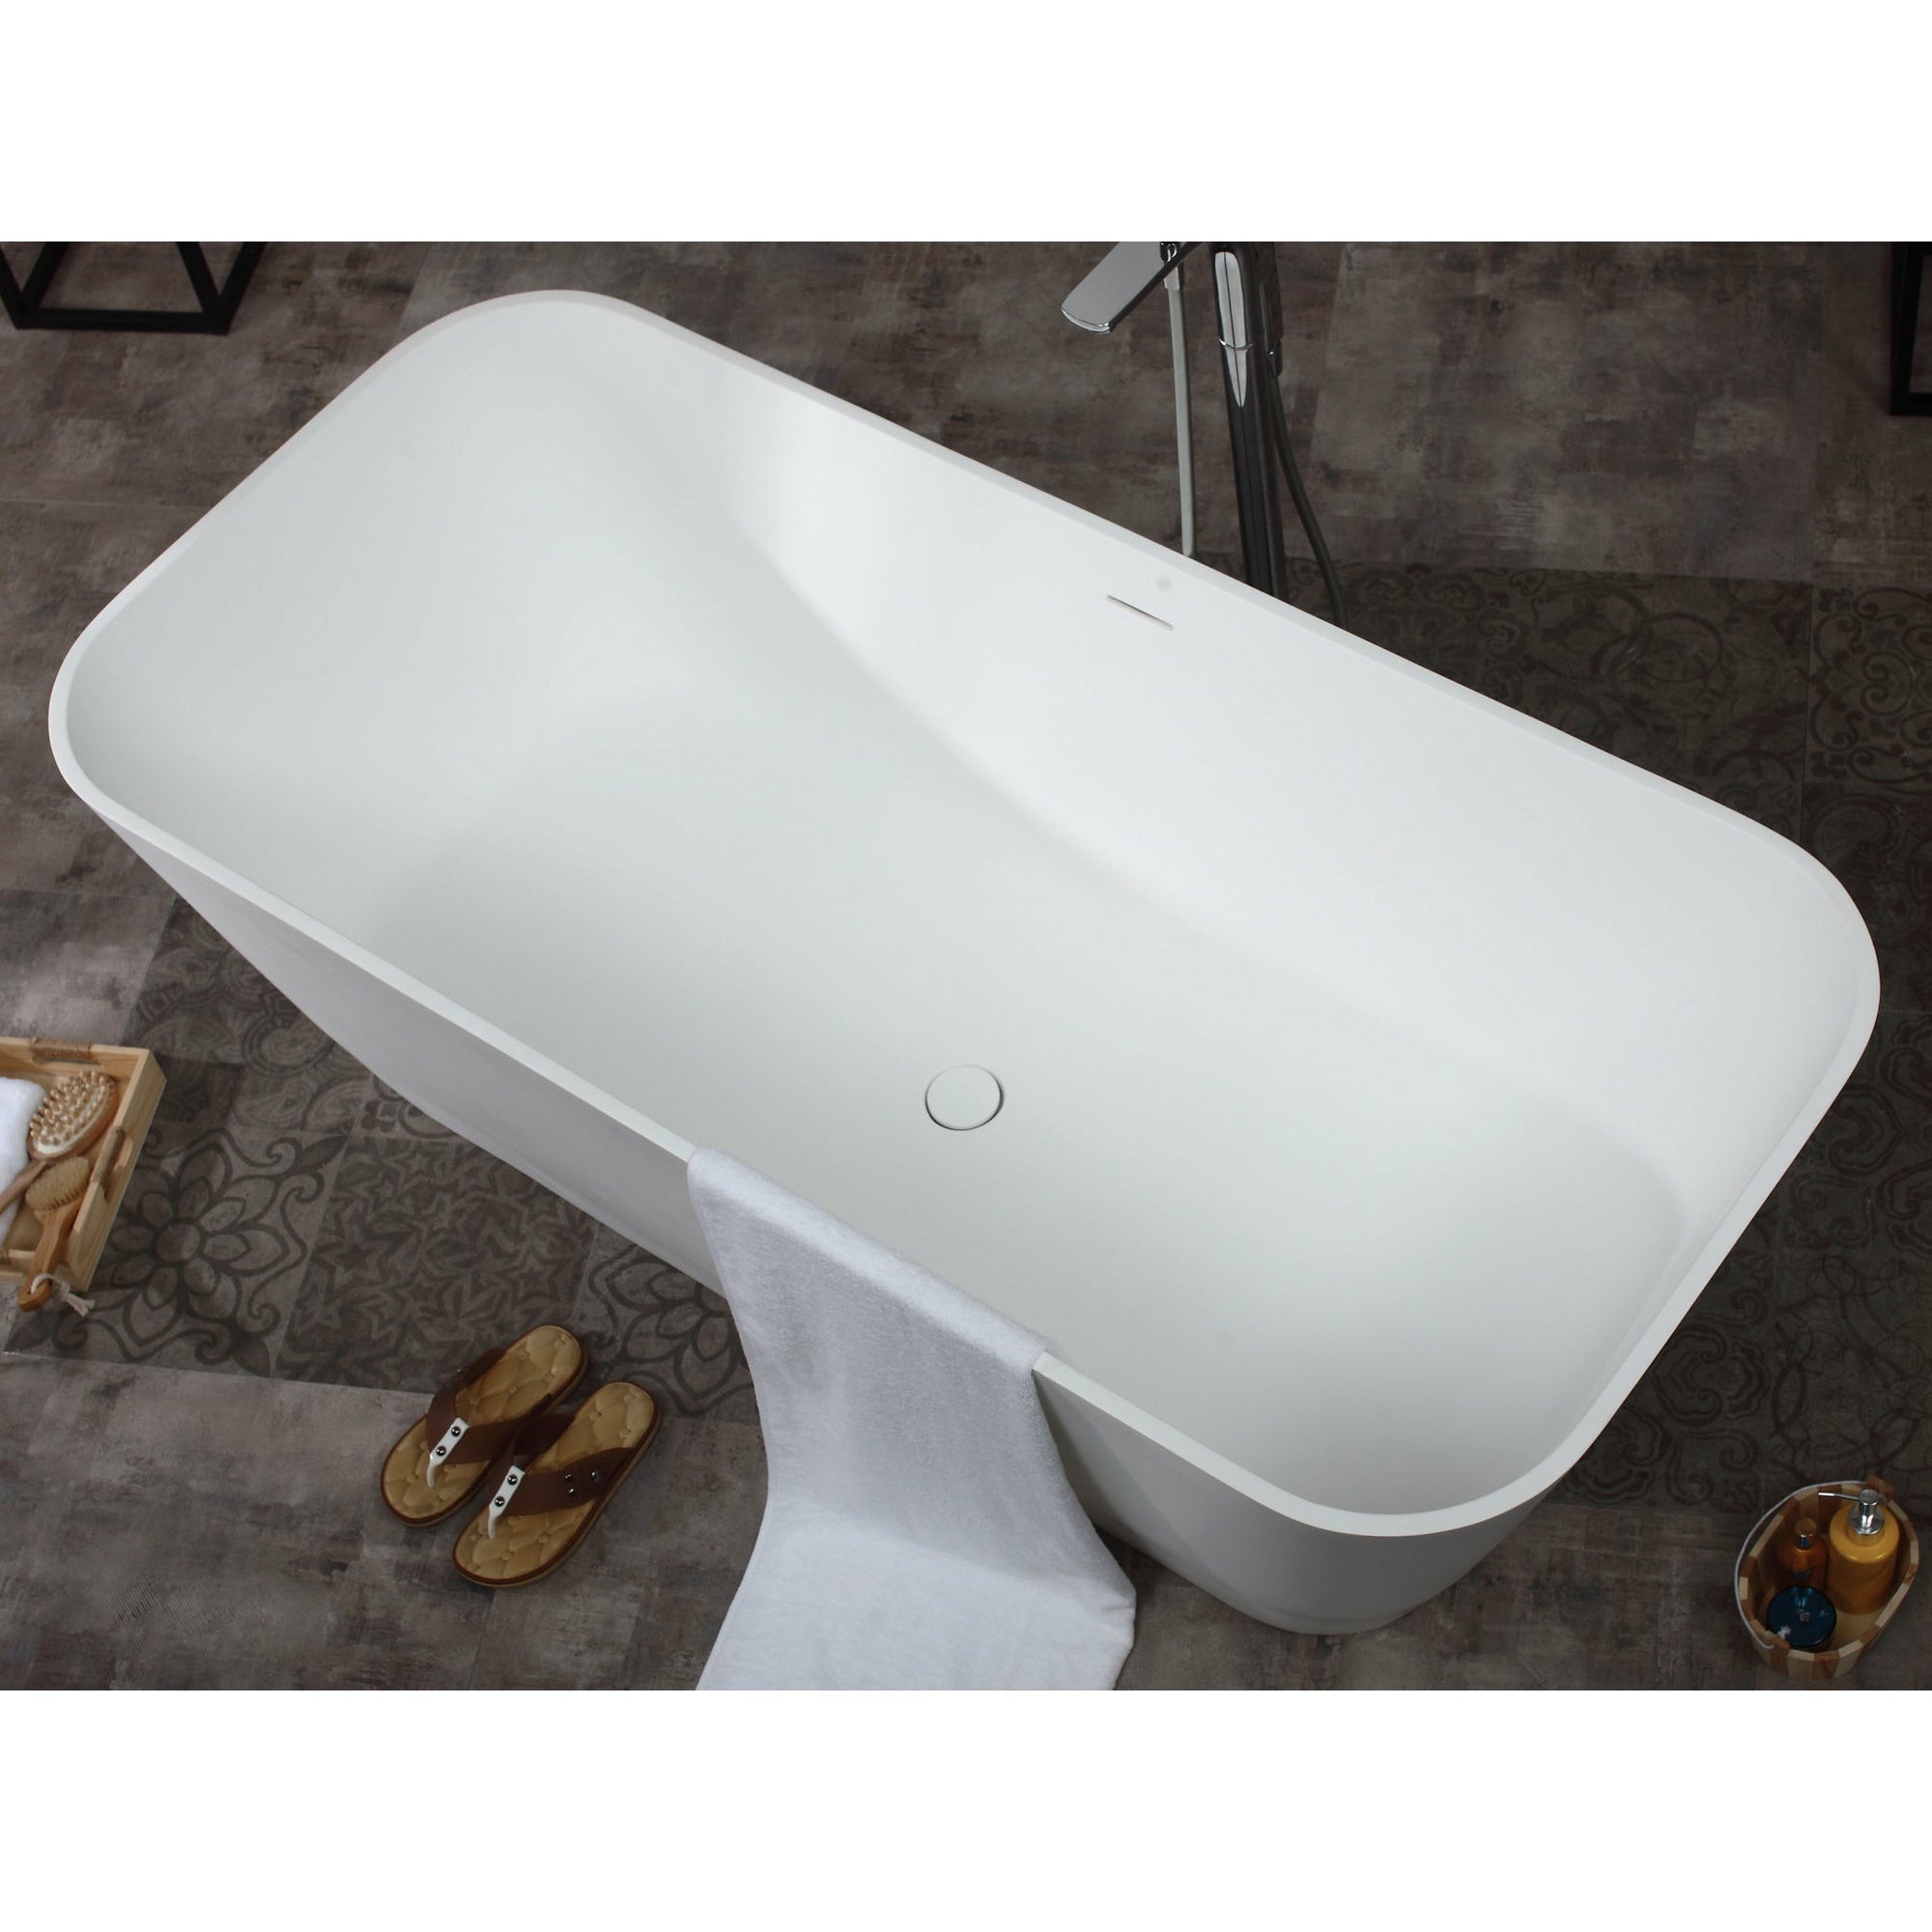 ALFI AB9952 67" White Rectangular Solid Surface Smooth Resin Soaking Bathtub with a matte finish in a white background